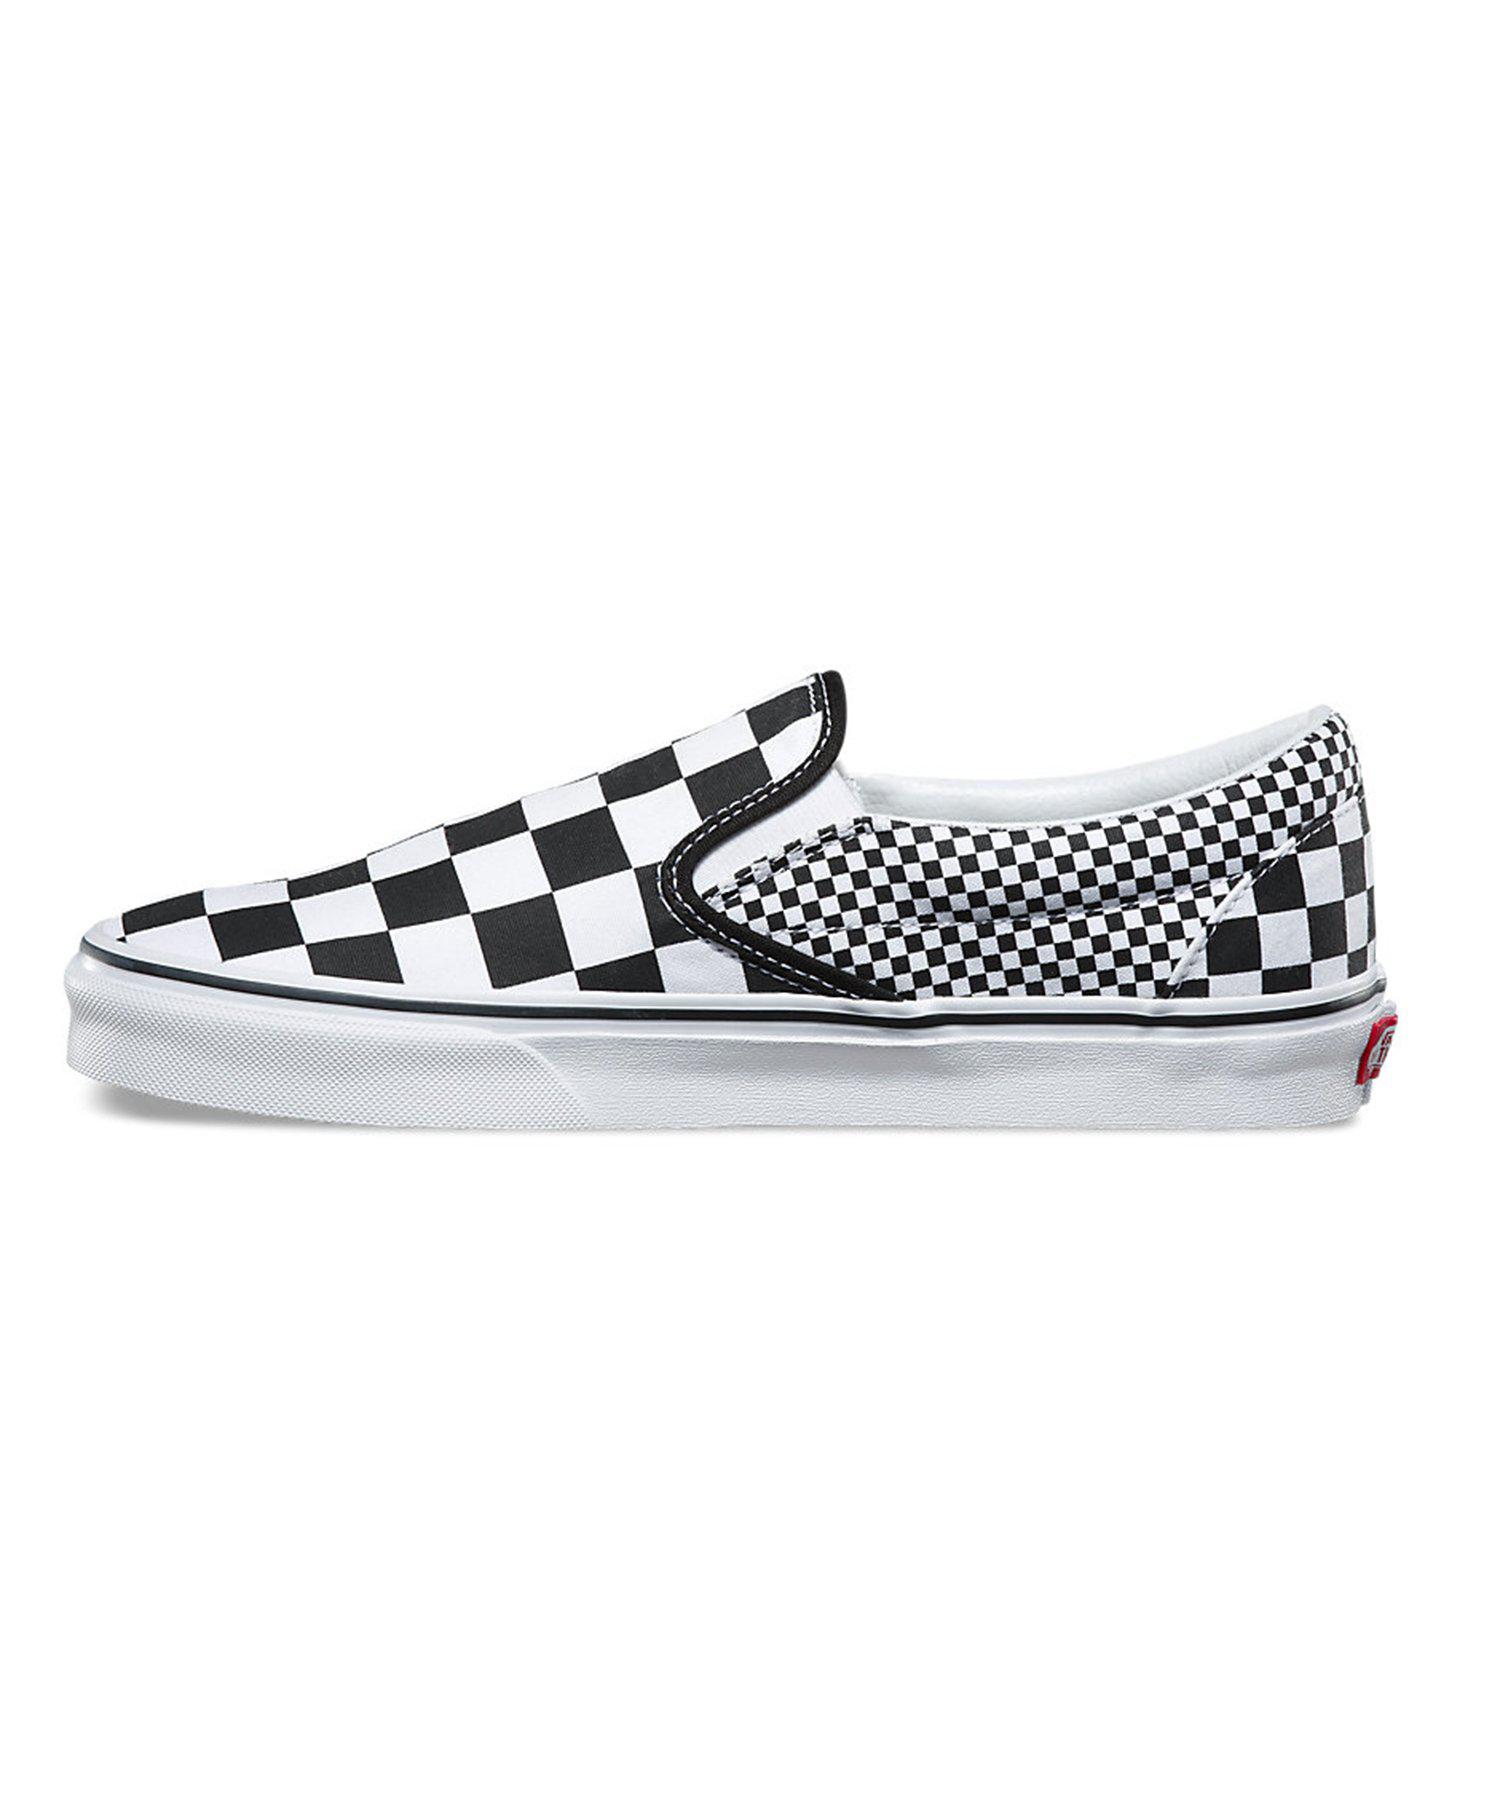 Vans Canvas Classic Slip-on In Mixed Checkerboard in White for Men - Lyst